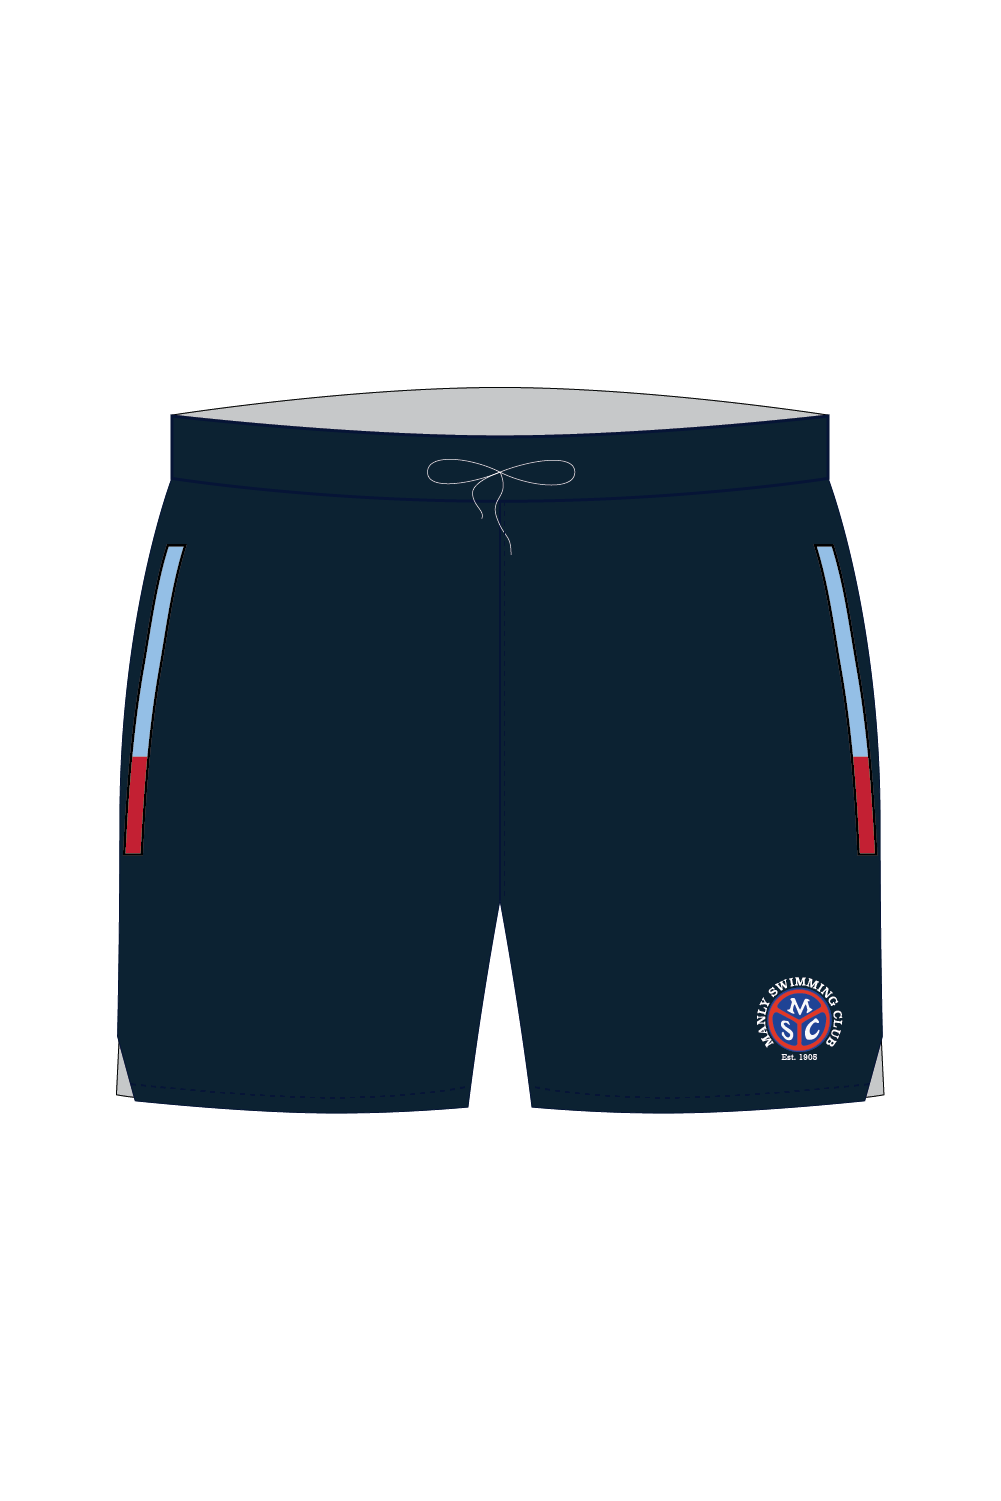 Manly Swimming Club Kid's Shorts